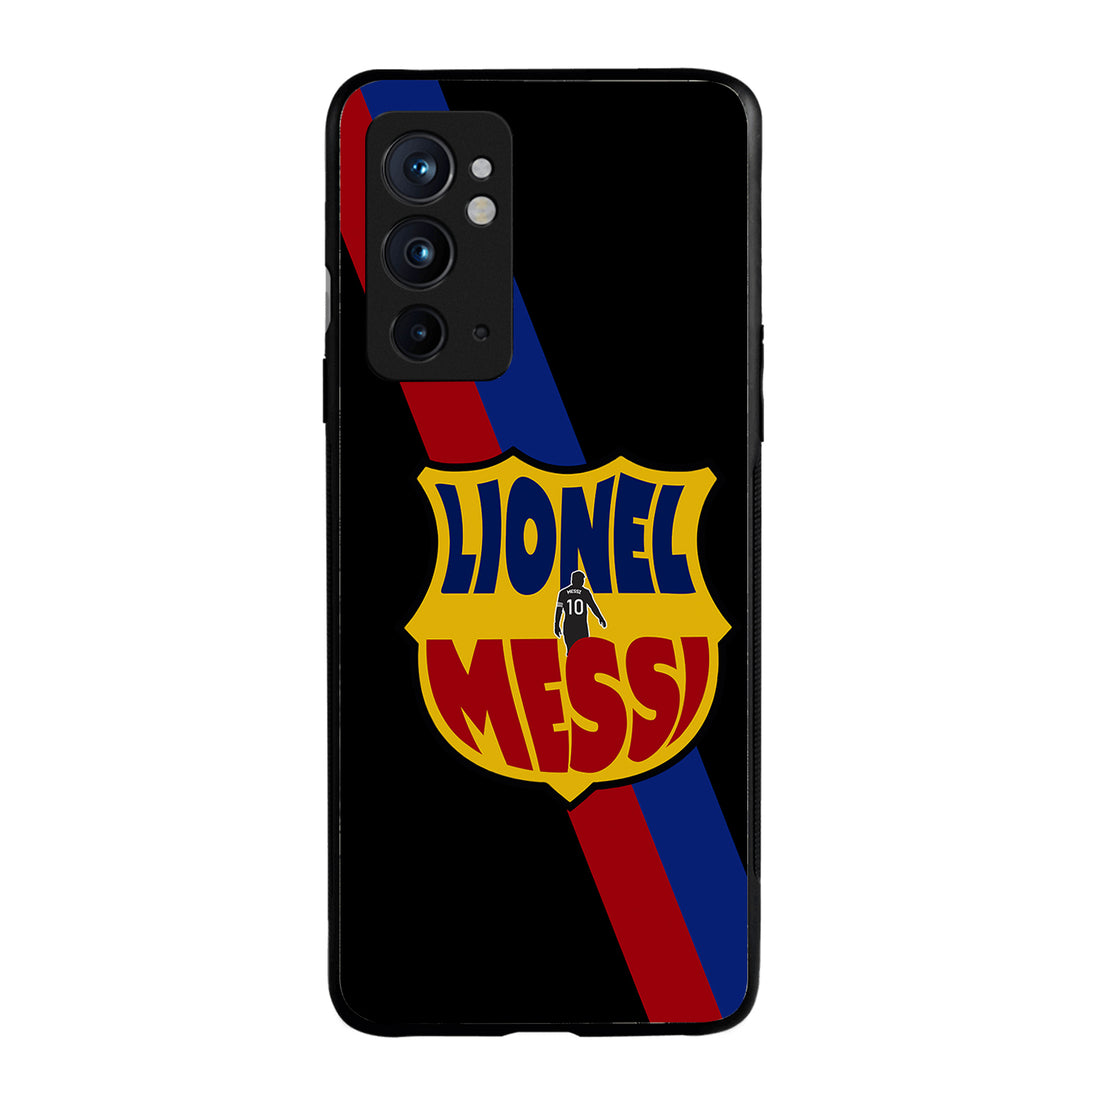 Lionel Messi Sports Oneplus 9 RT Back Case